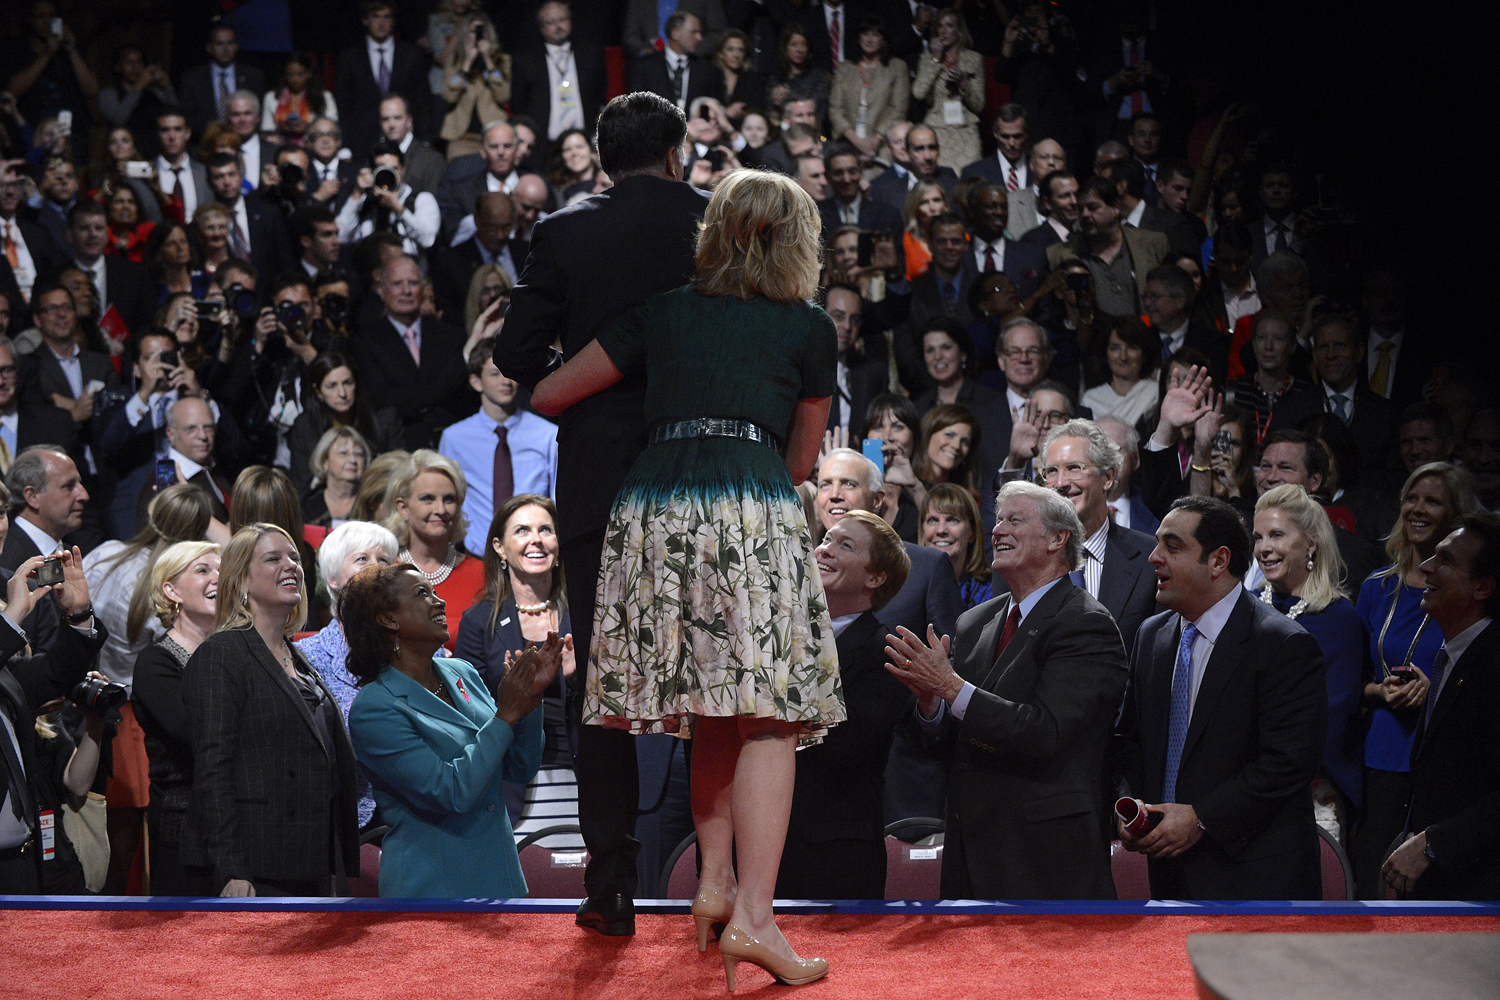 Image: Oct. 22, 2012. Republican Presidential Candidate Mitt Romney is embraced by his wife Ann as members of the audience applaud after the conclusion of the final Presidential debate with President Barack Obama on the campus of Lynn University in Boca Raton, Florida.